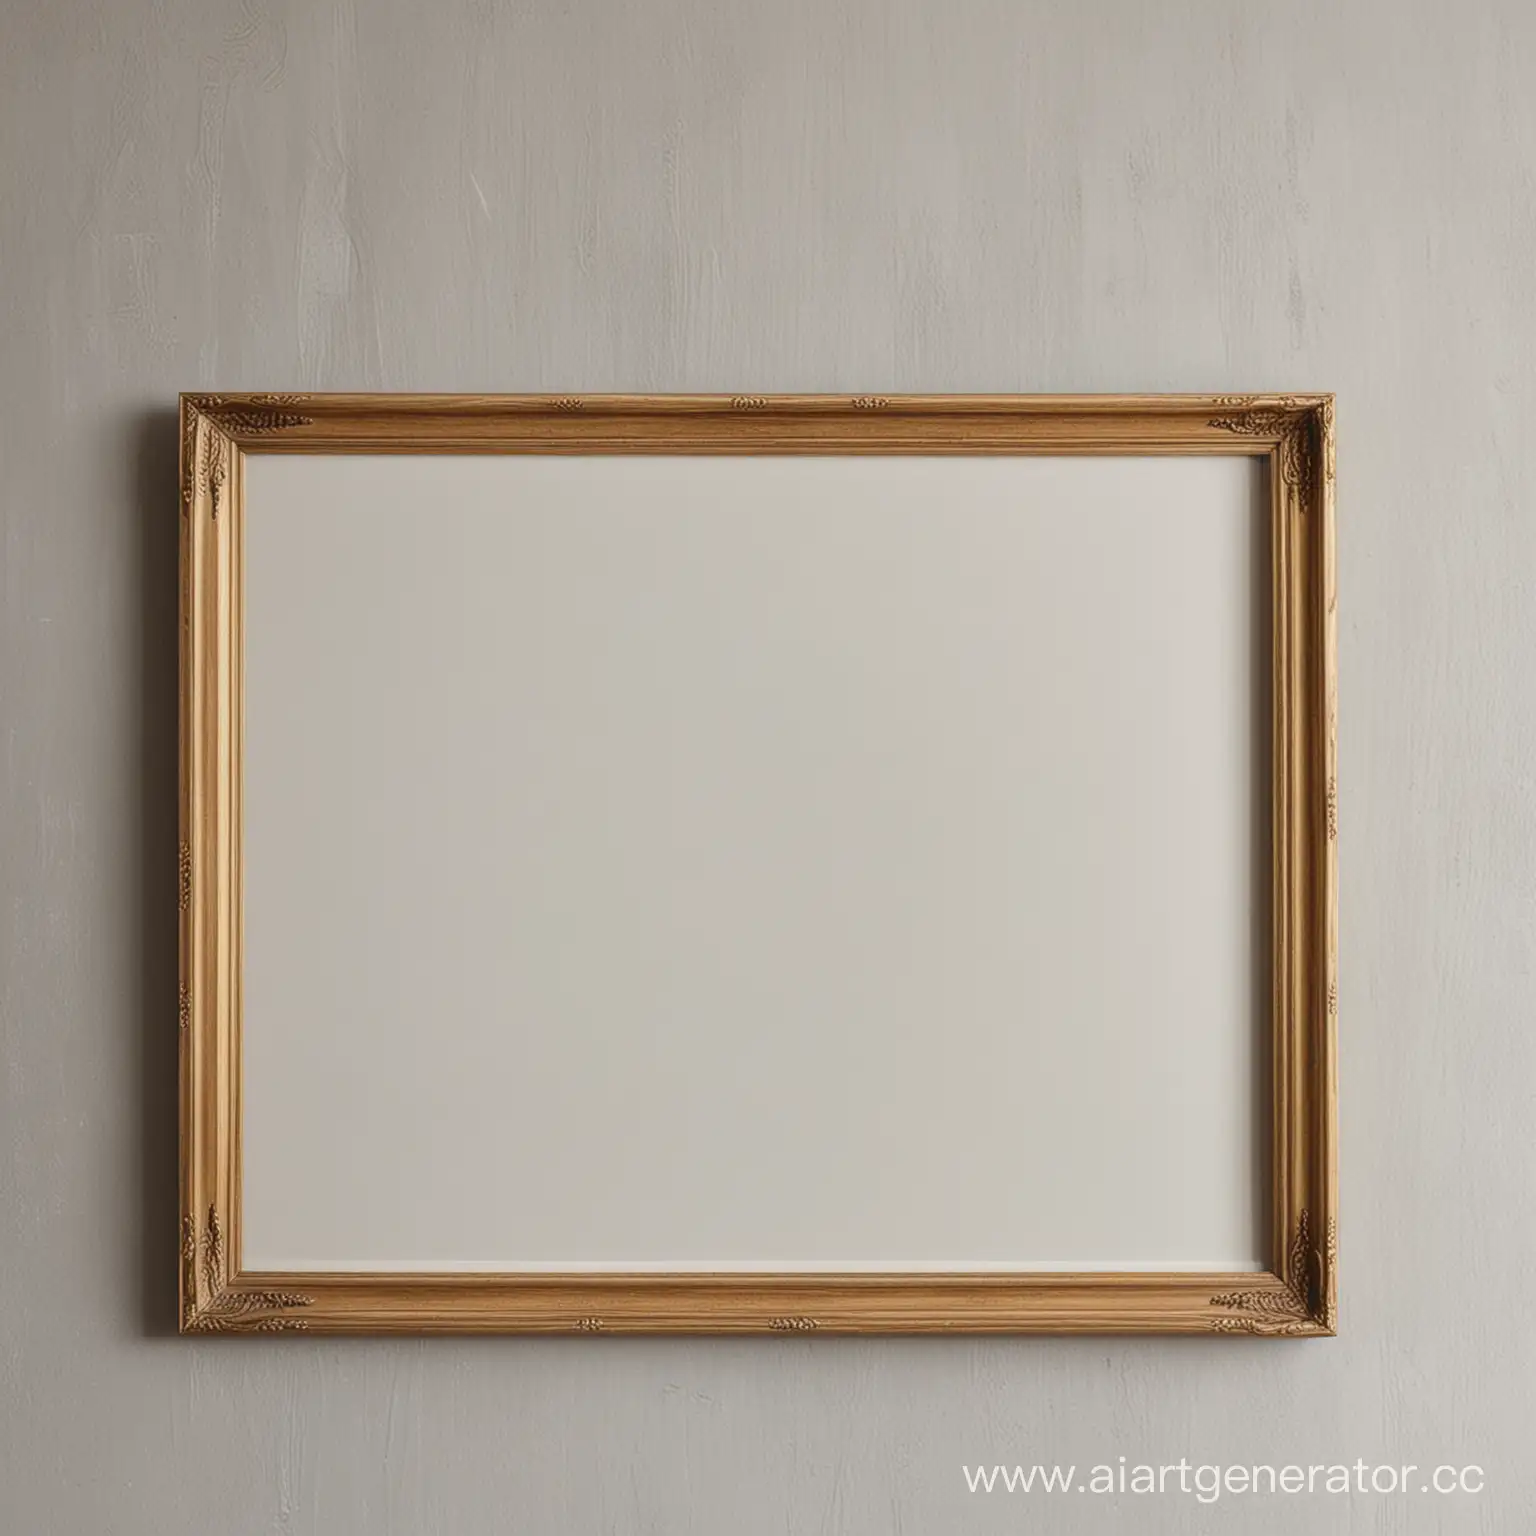 Elegant-WallMounted-Empty-Picture-Frame-for-Home-Dcor